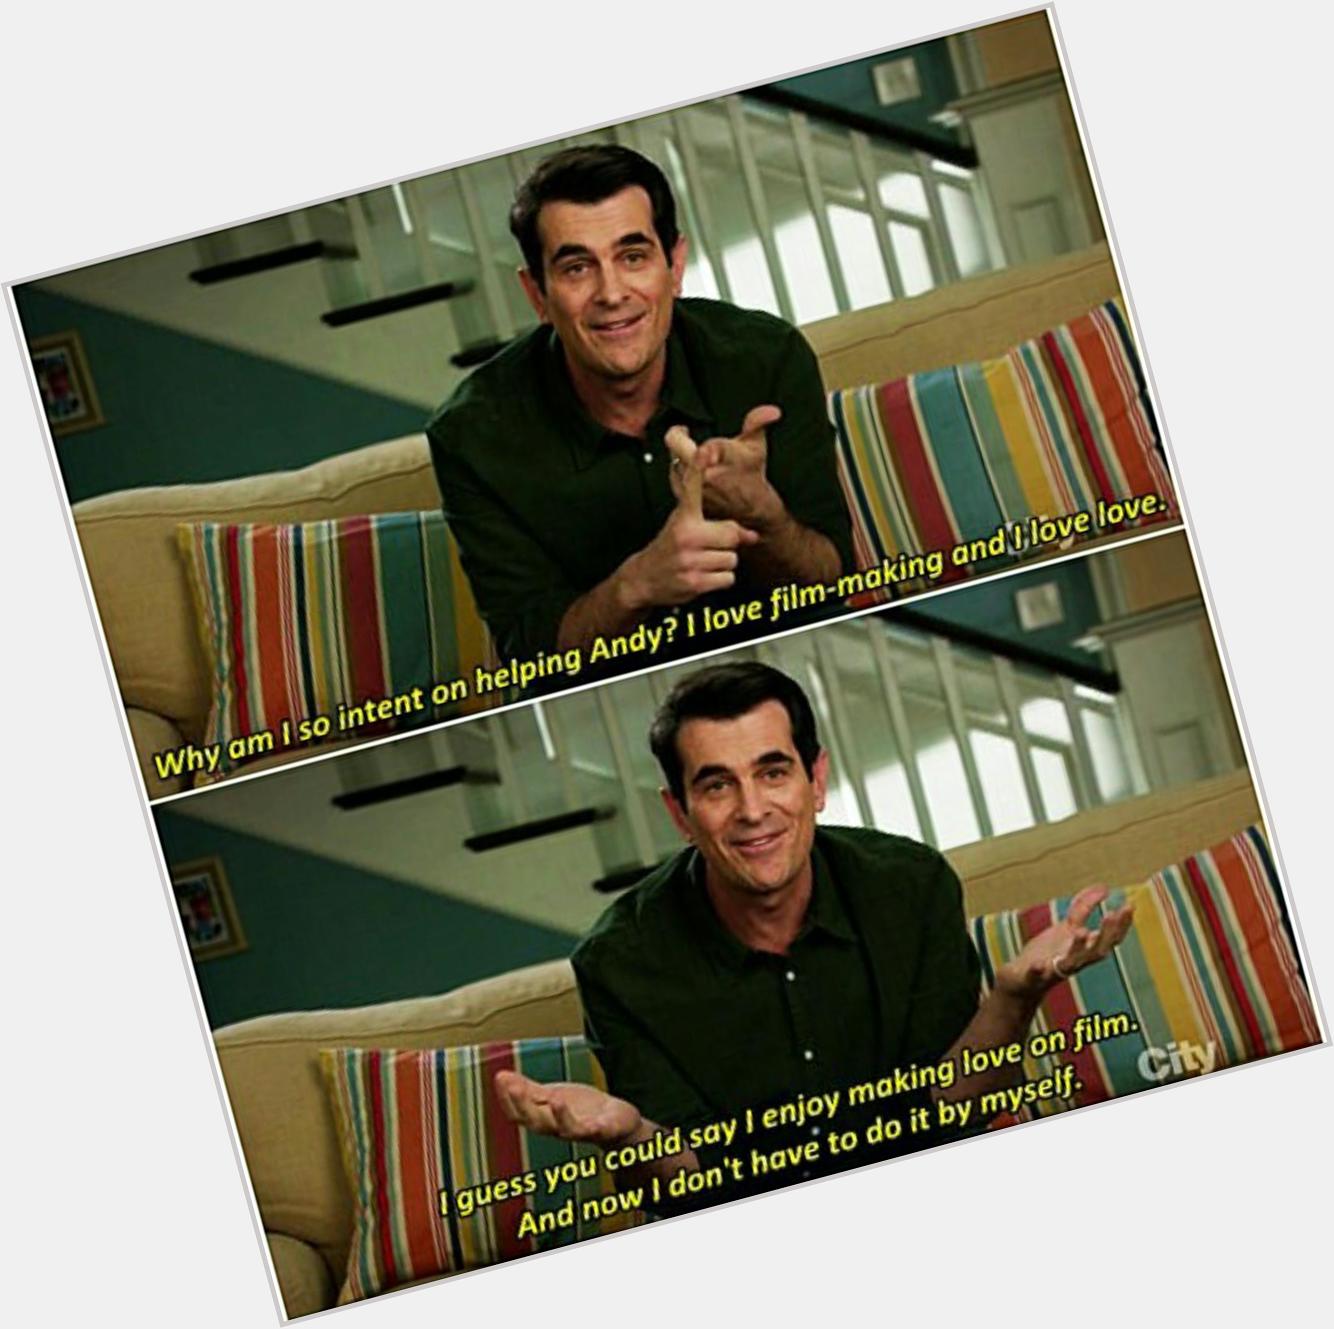 Coolest dad everrrrr!
One of my favourite characters of all time!
Happy birthday Ty Burrell!   